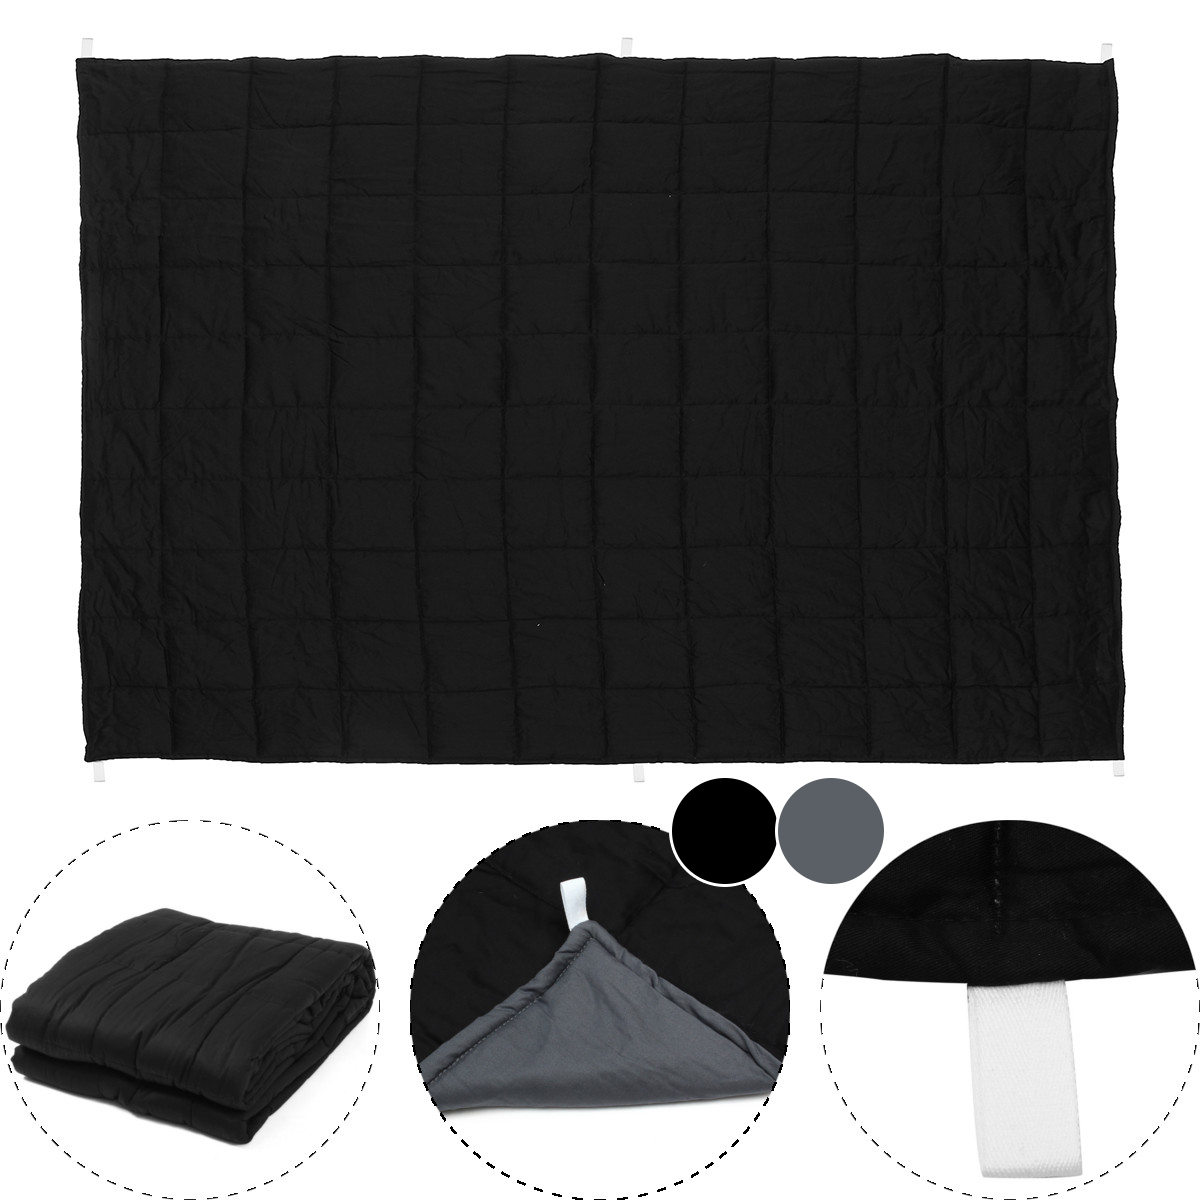 120x180CM-Black-Grey-Weighted-Blanket-Cotton-79115kg-Heavy-Sensory-Relax-Blankets-1349466-2